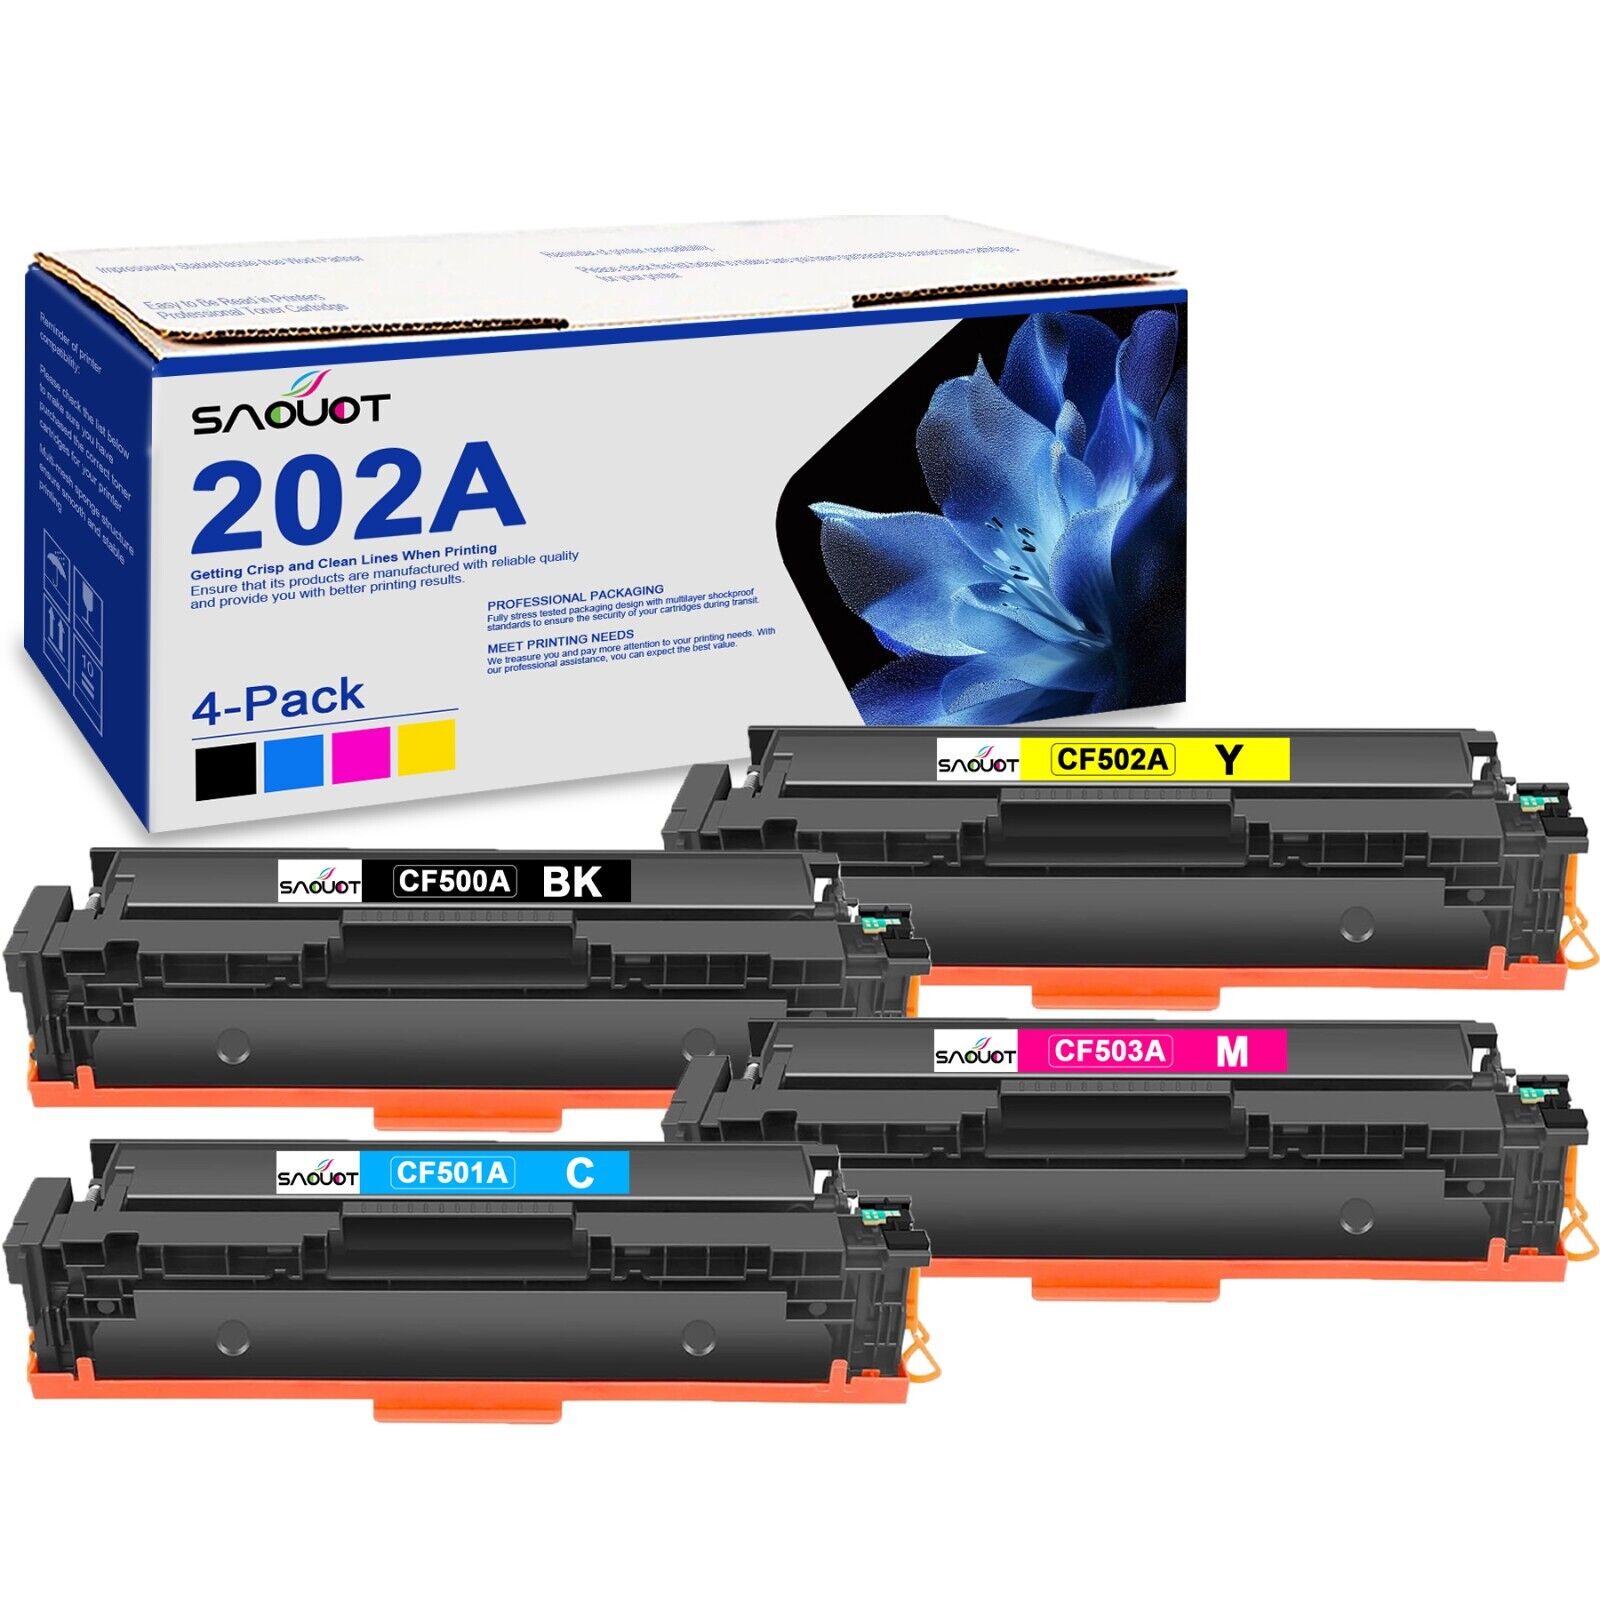 202A Toner Cartridge Replacement for HP CF500A Pro MFP M254dw M281fdw M281cdw